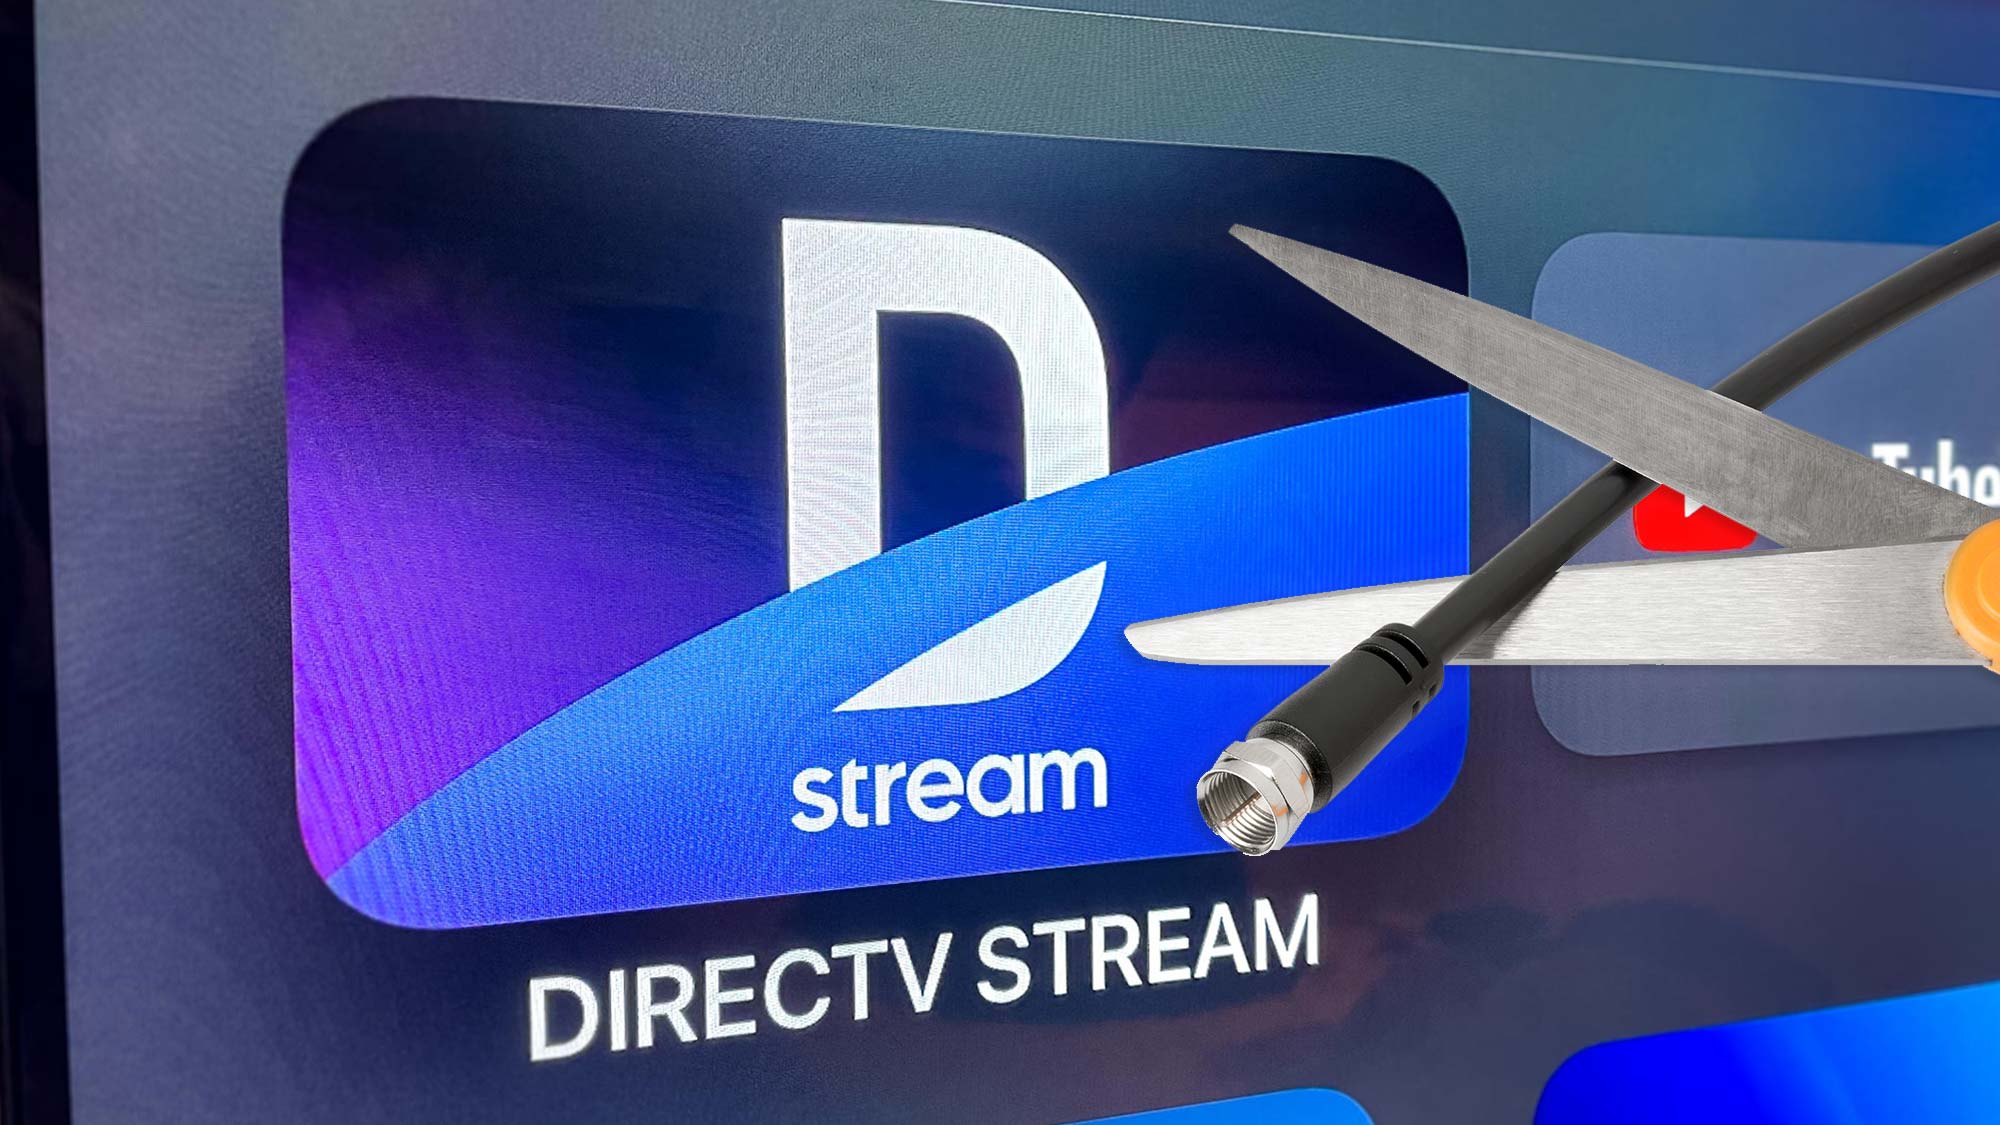 I'm testing DirecTV Stream to cut the cord — here's the pros and